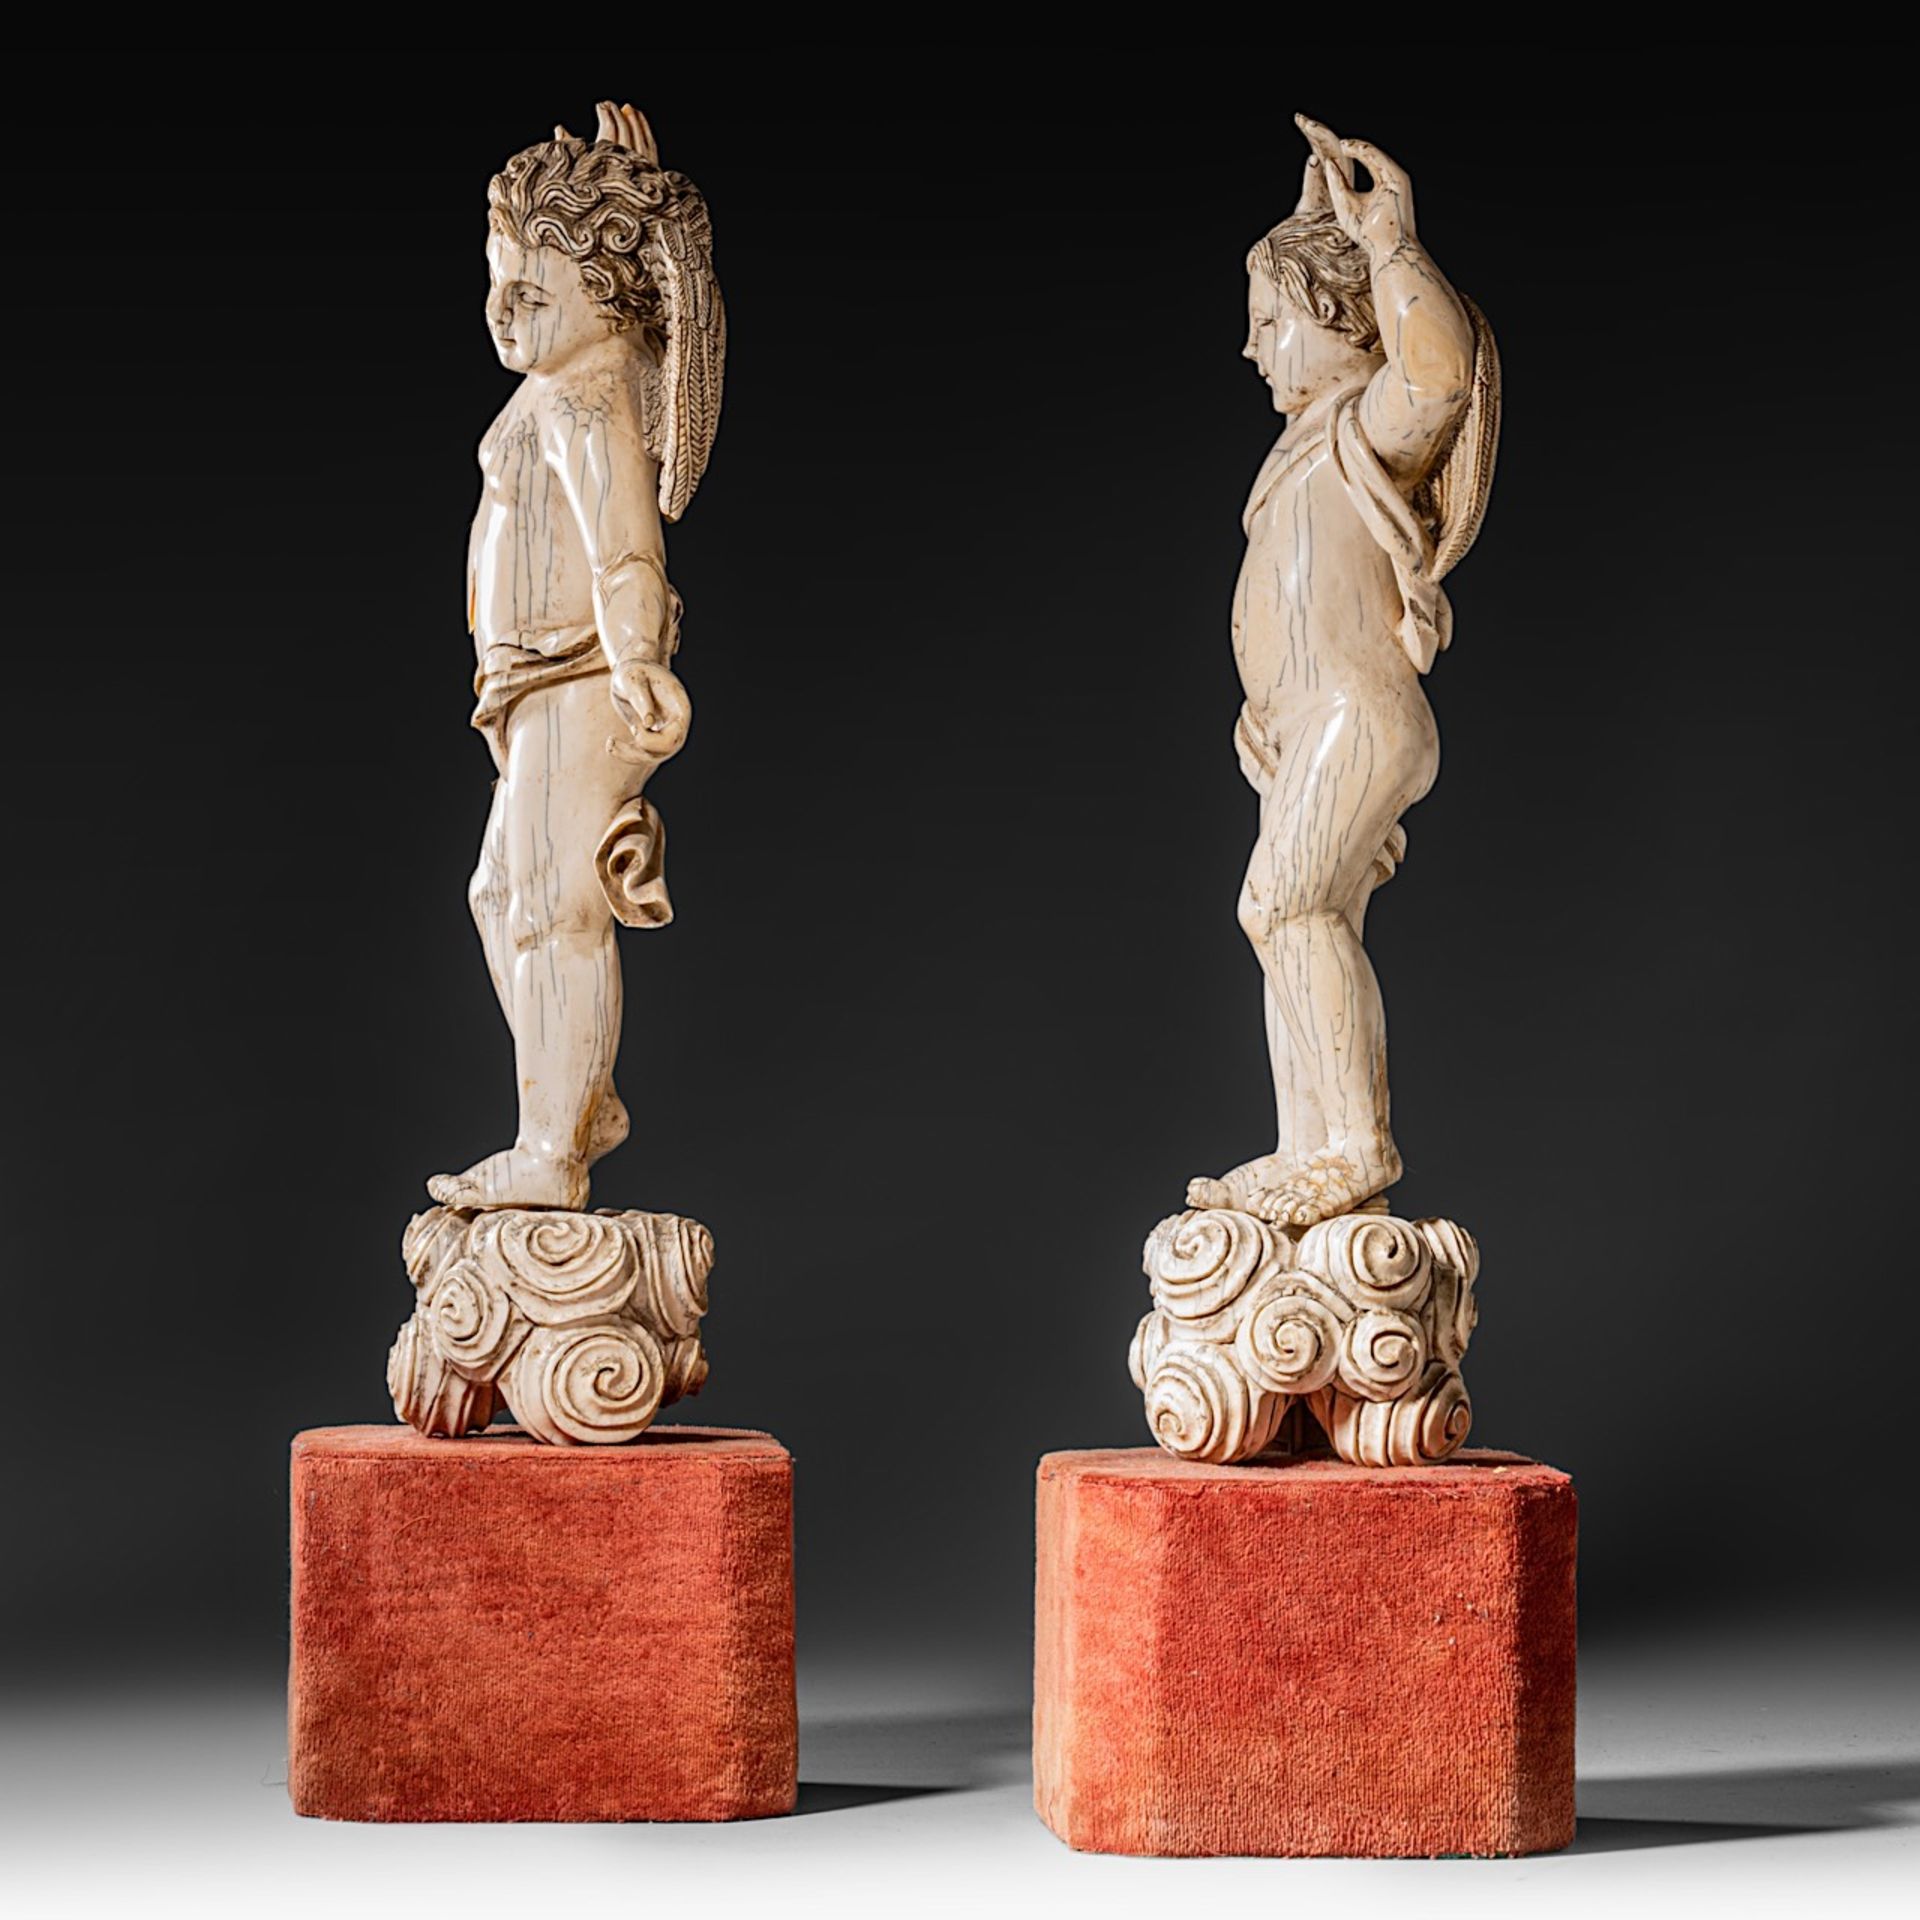 A pair of 17thC Indo-Portuguese ivory angels, H (figures) 38,5 cm - total H 49 cm / 2862 - 2968 g (+ - Image 3 of 7